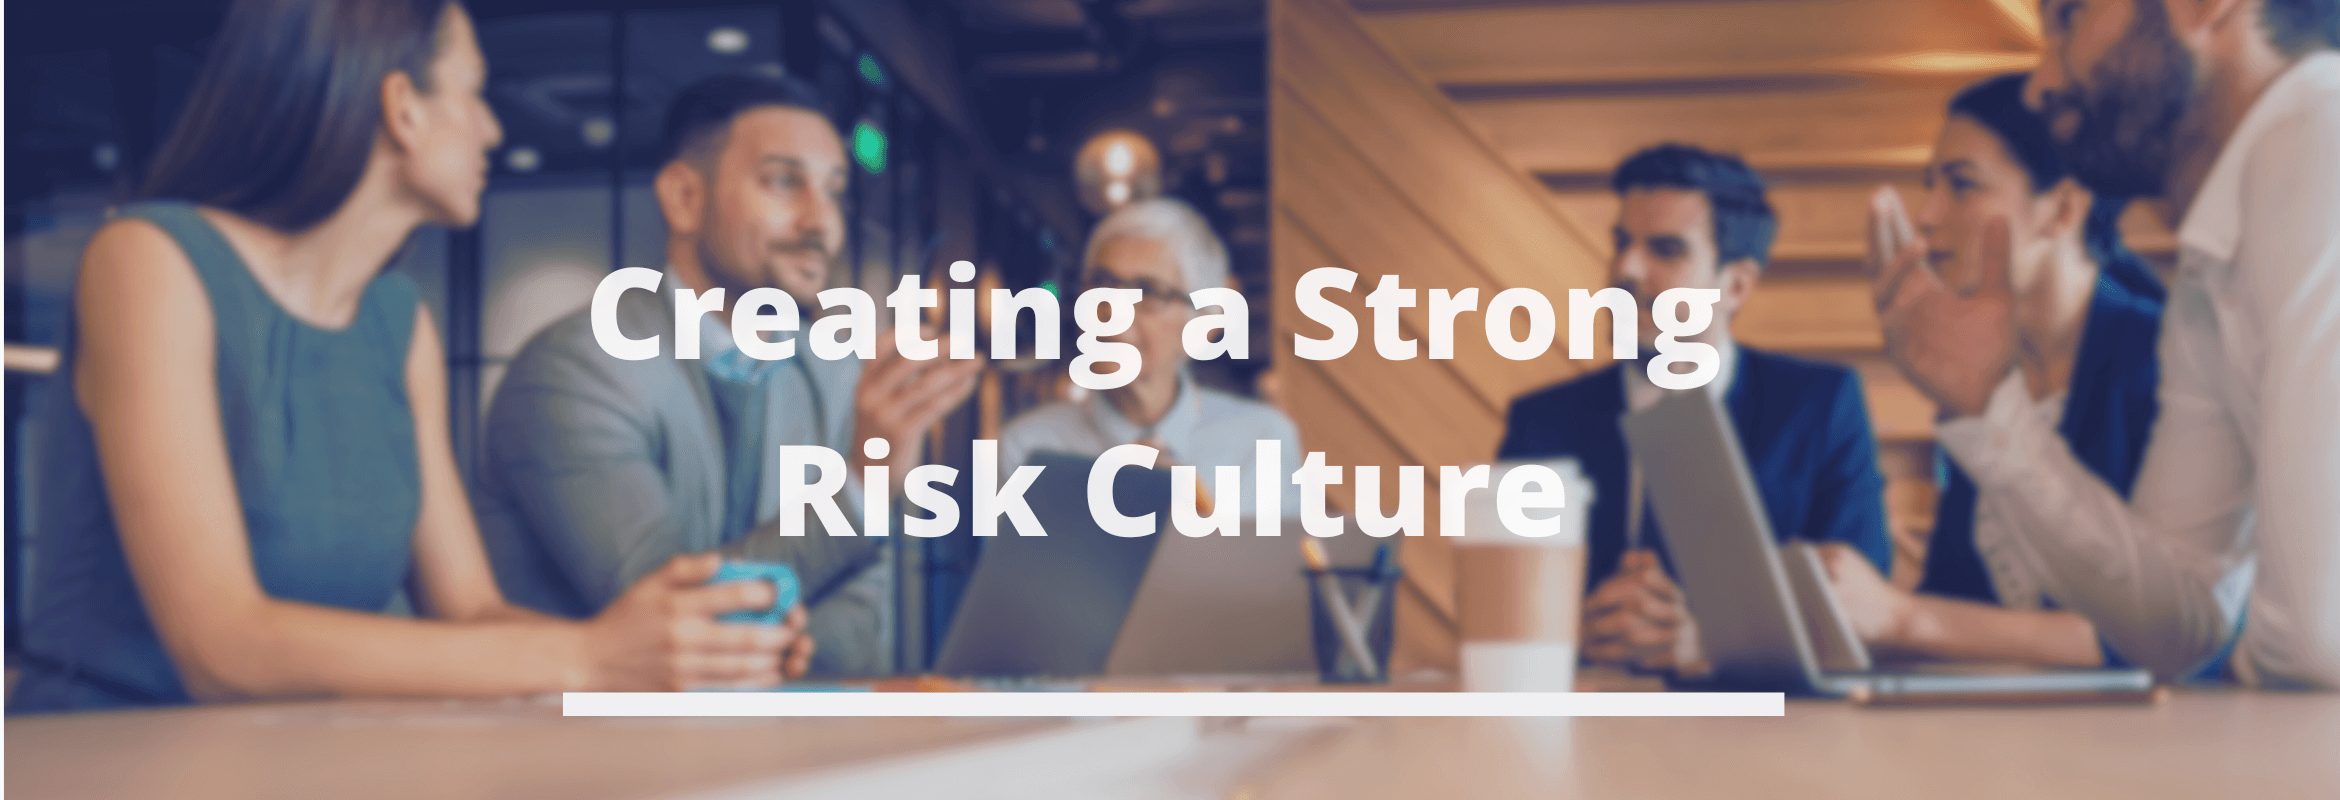 Image of Creating a Strong Risk Culture